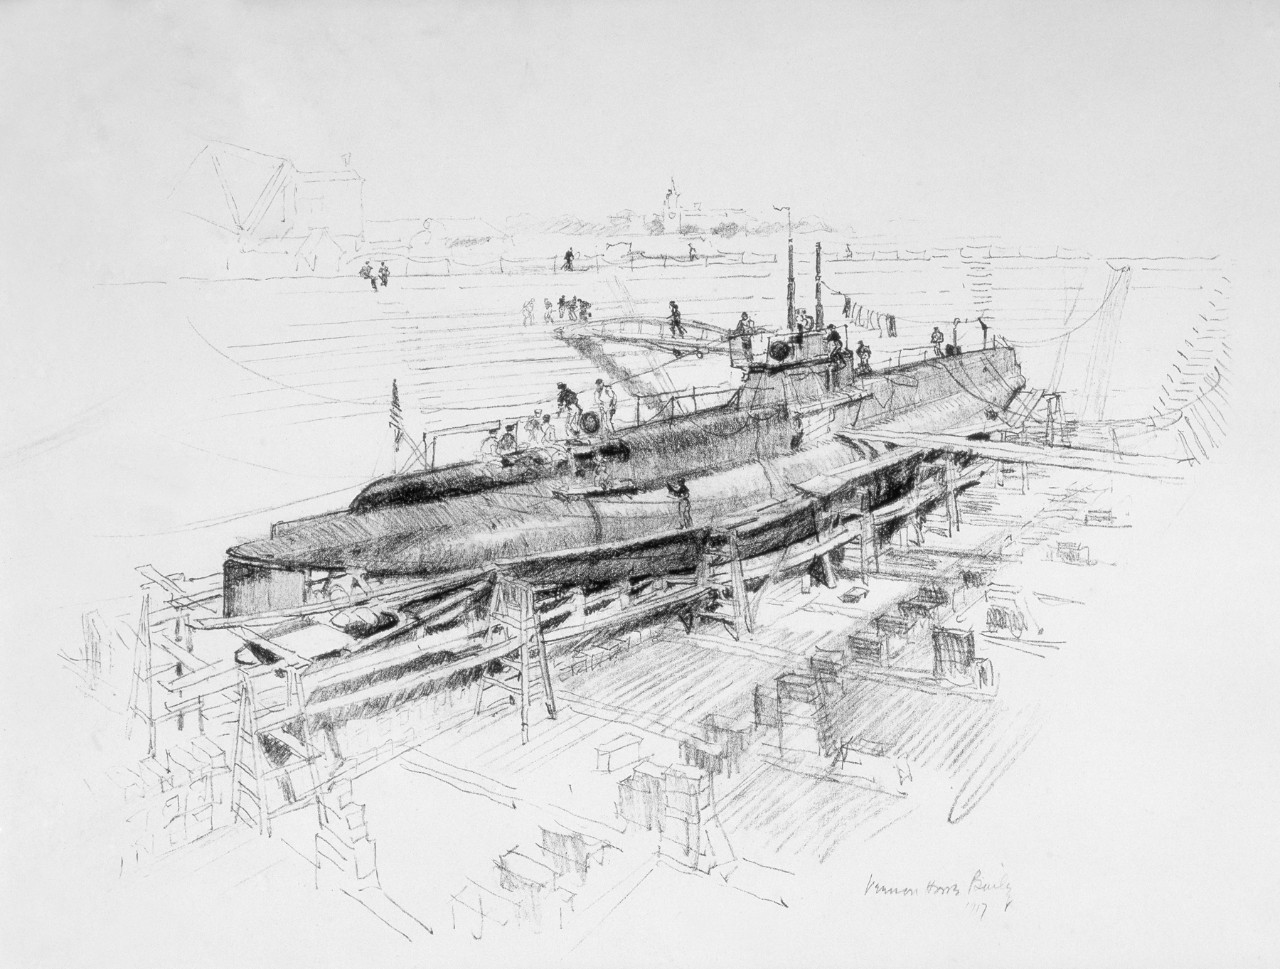 A submarine in a dry-dock being worked on